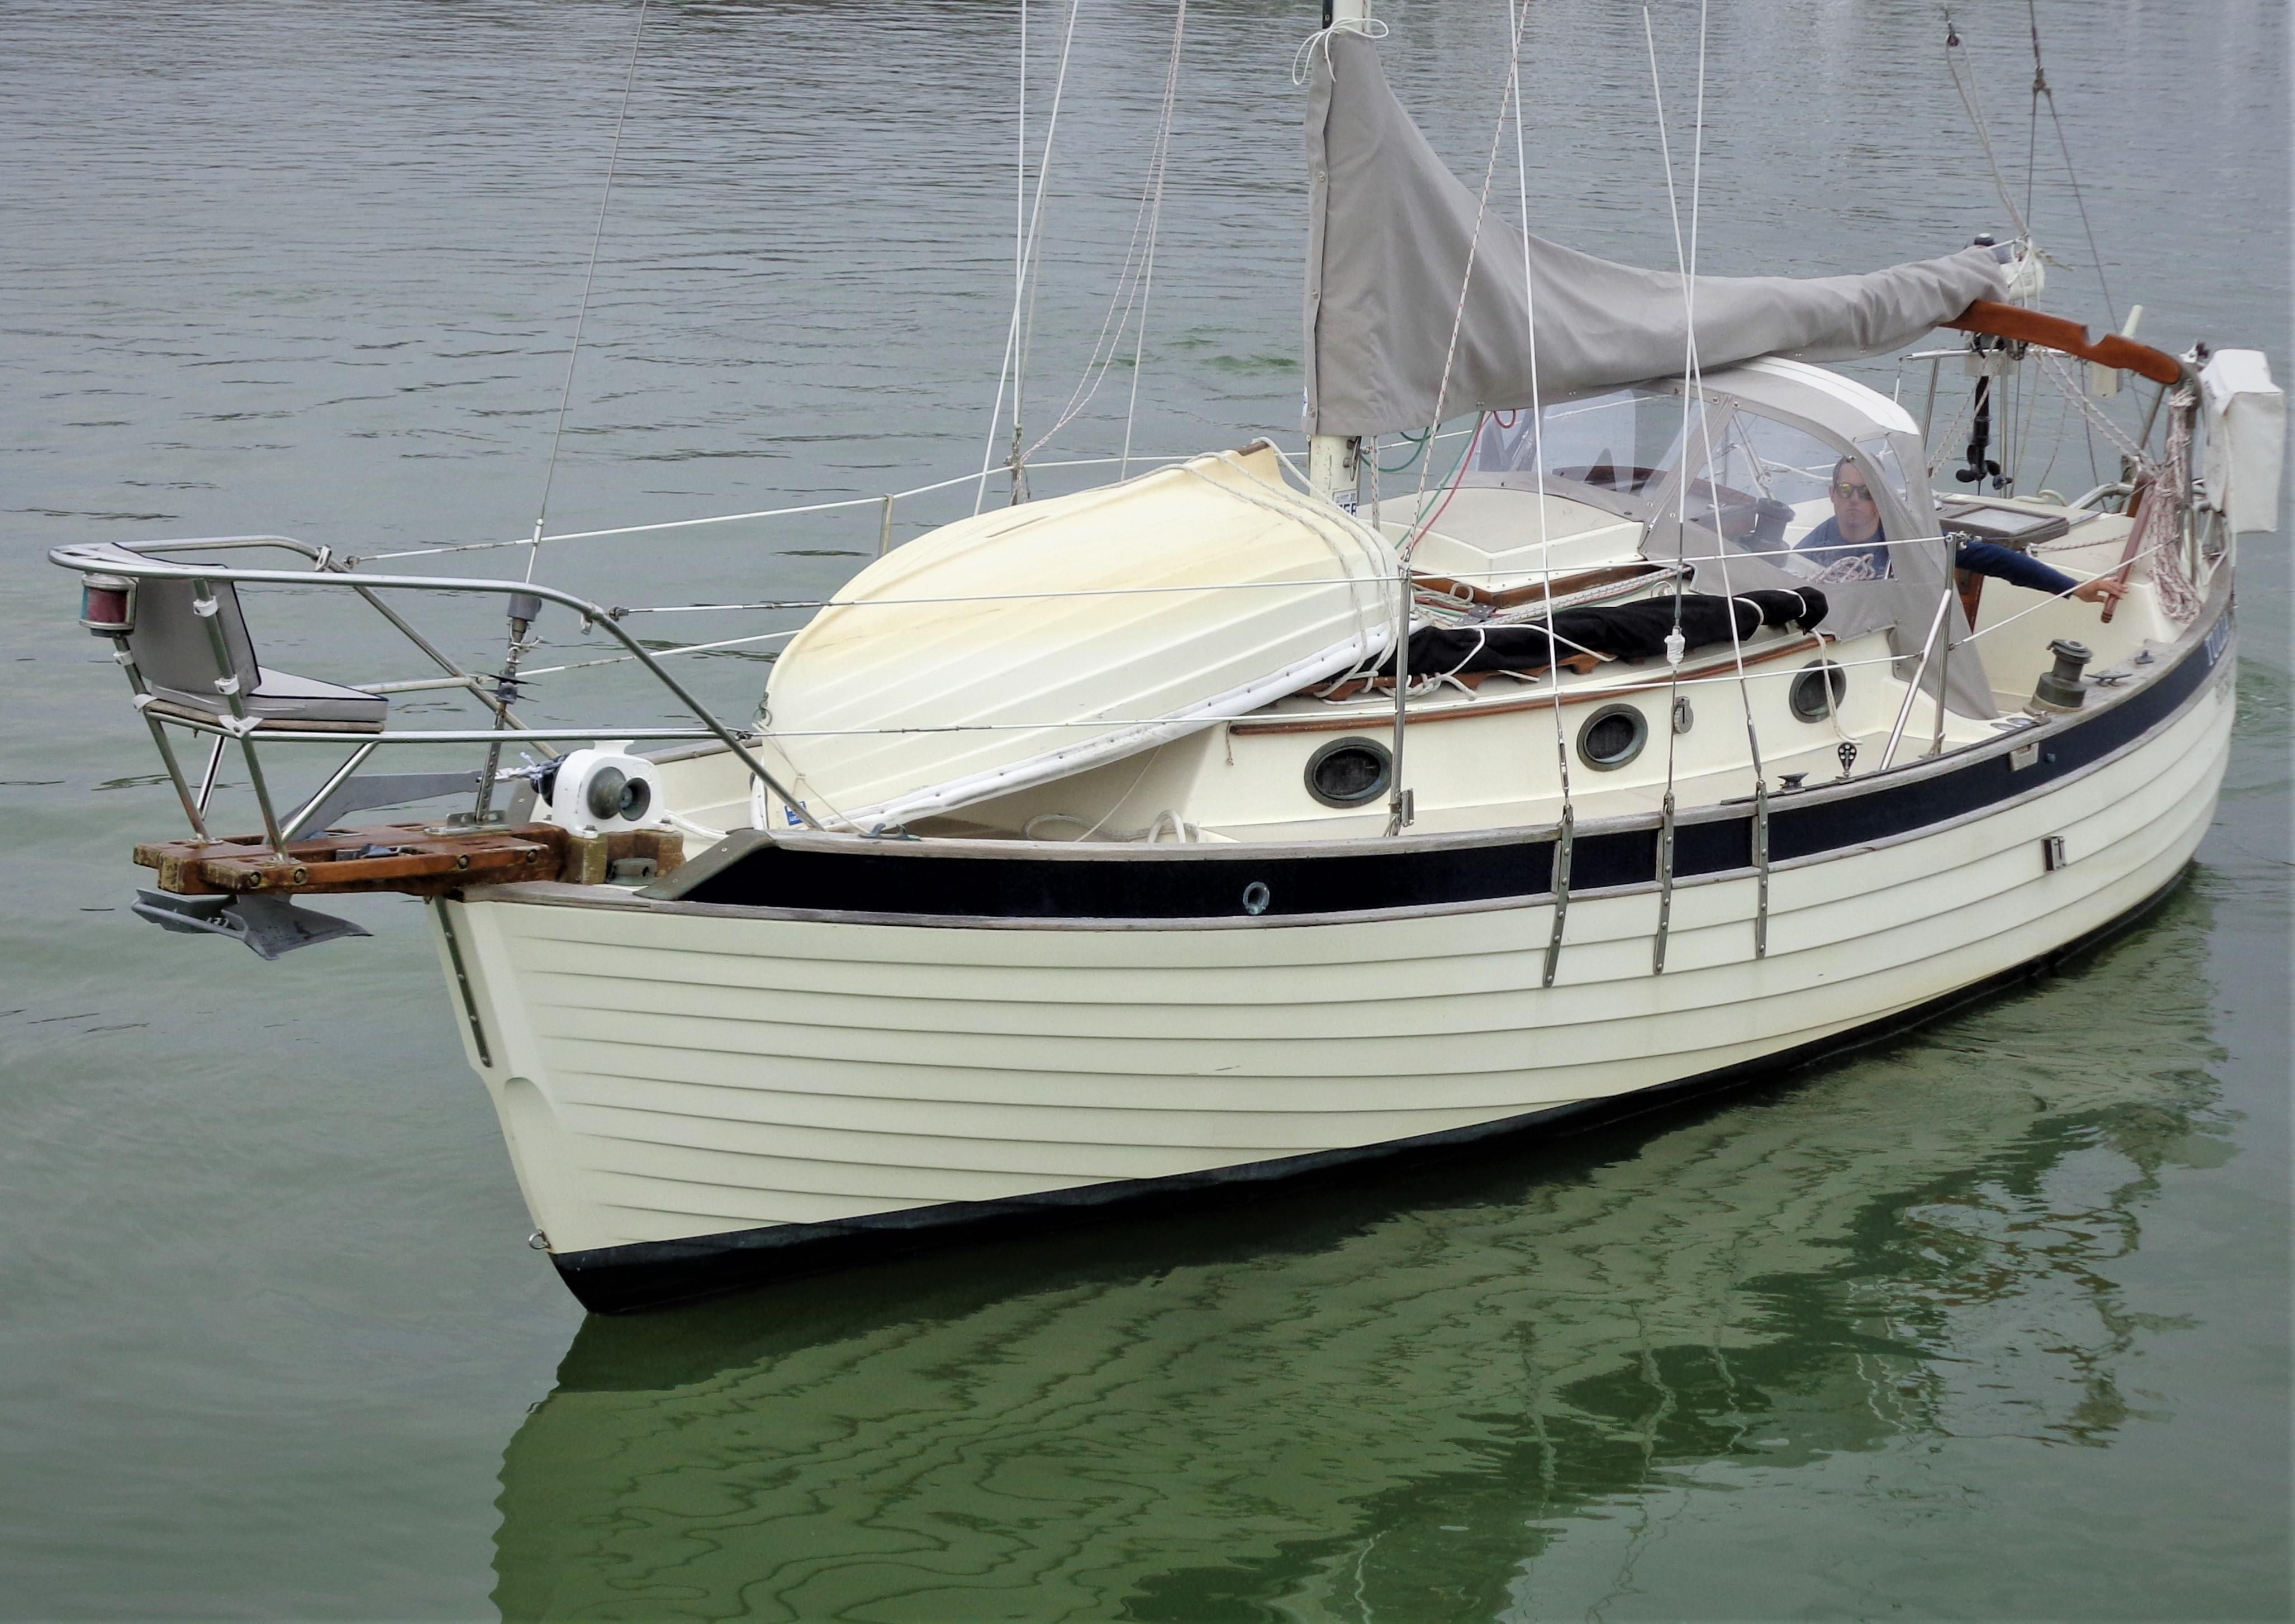 27 foot sailboats for sale